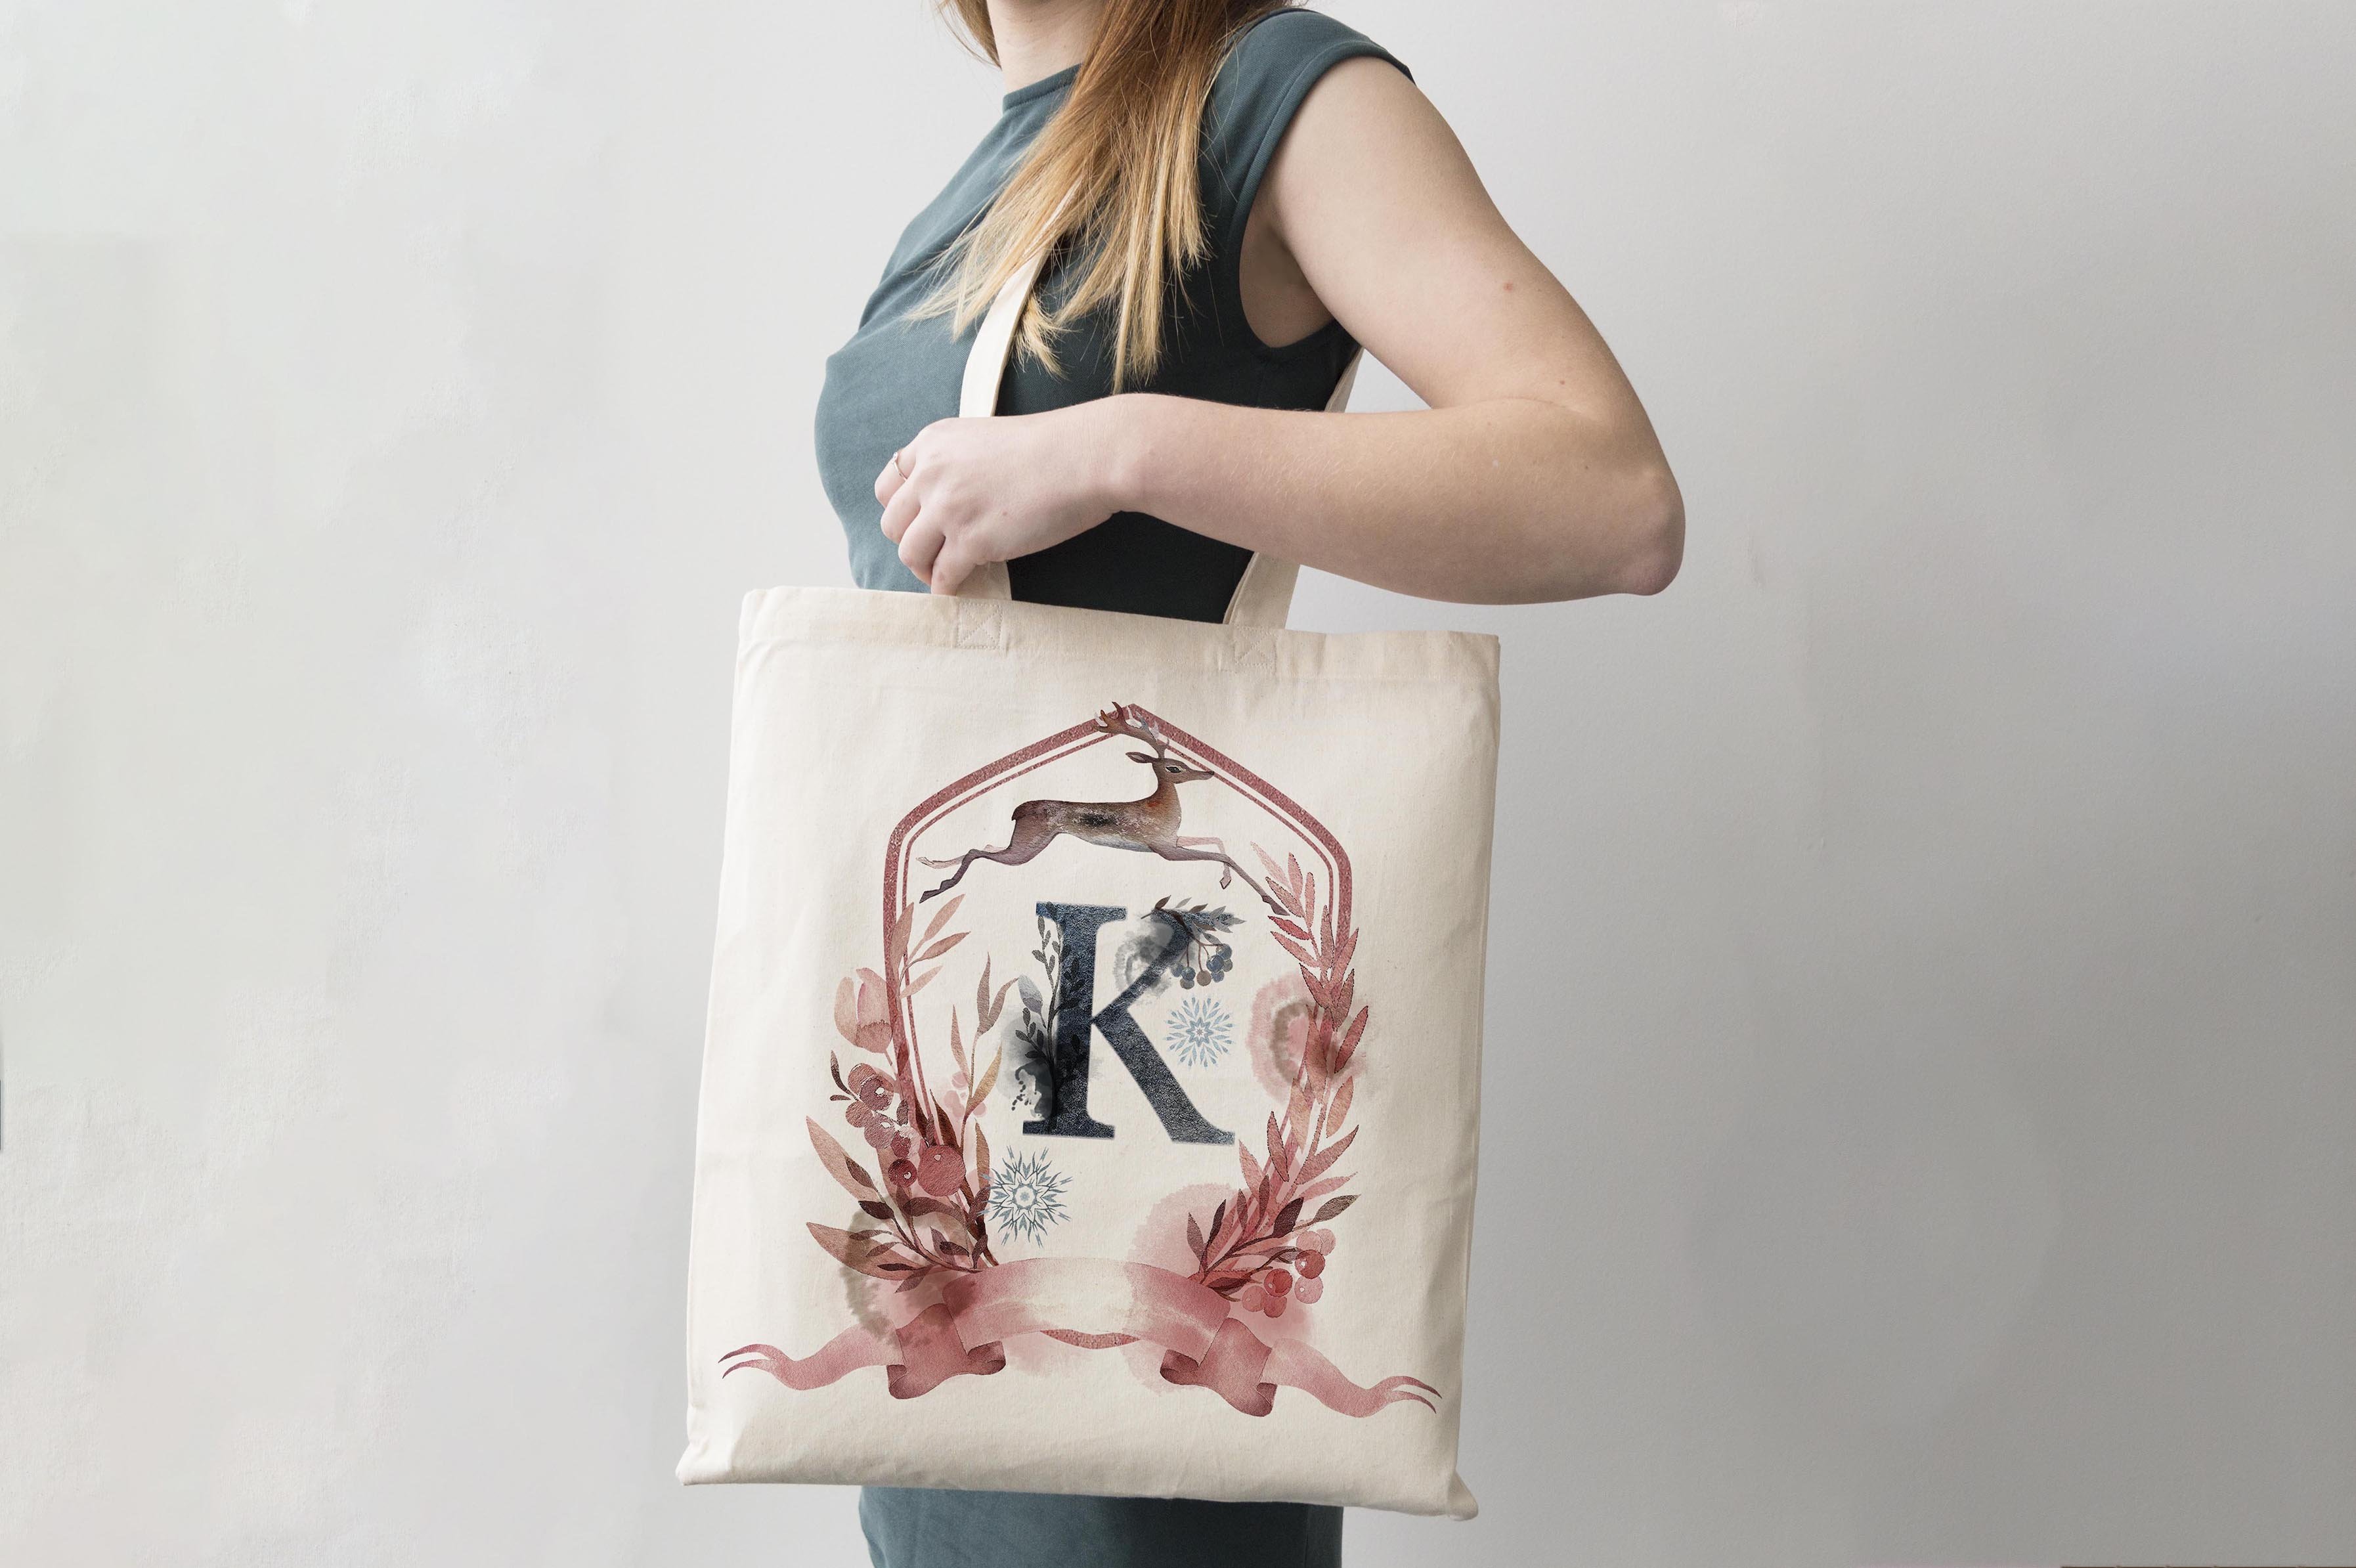 Woman holding tote bag mockup preview image.